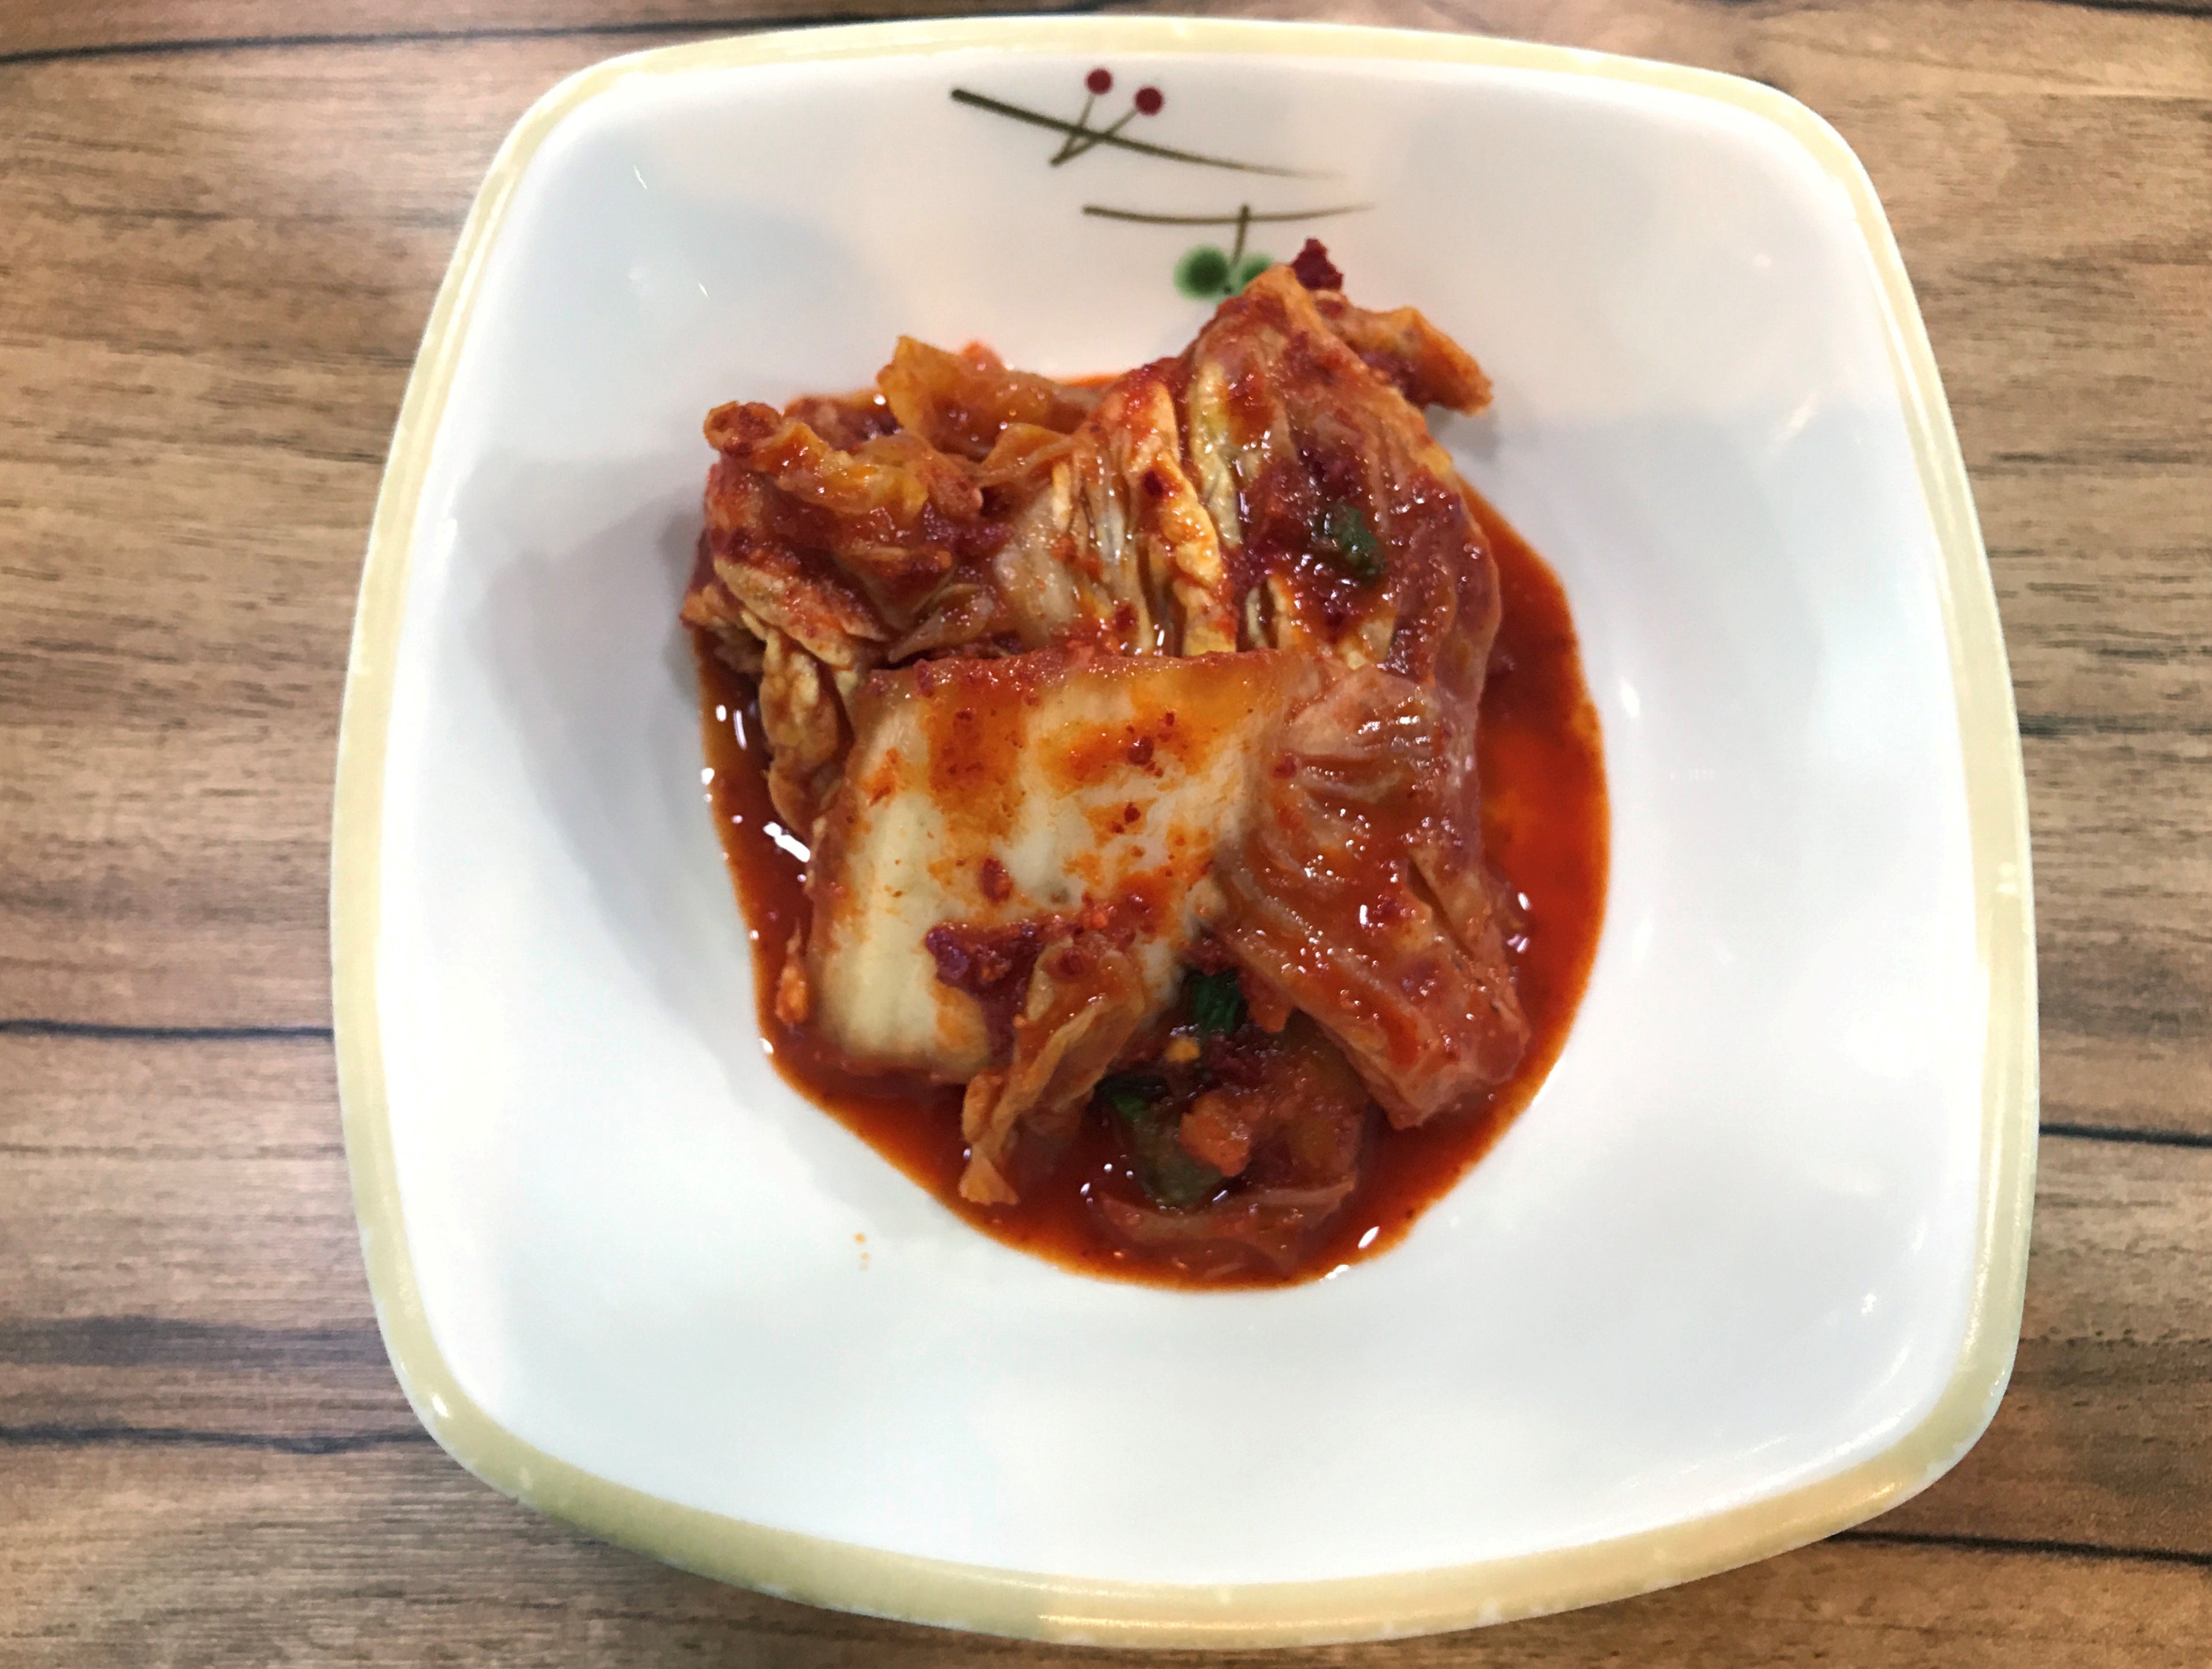 South Korea’s agricultural ministry refuted the Chinese claims, saying kimchi has ‘nothing to do’ with pao cai